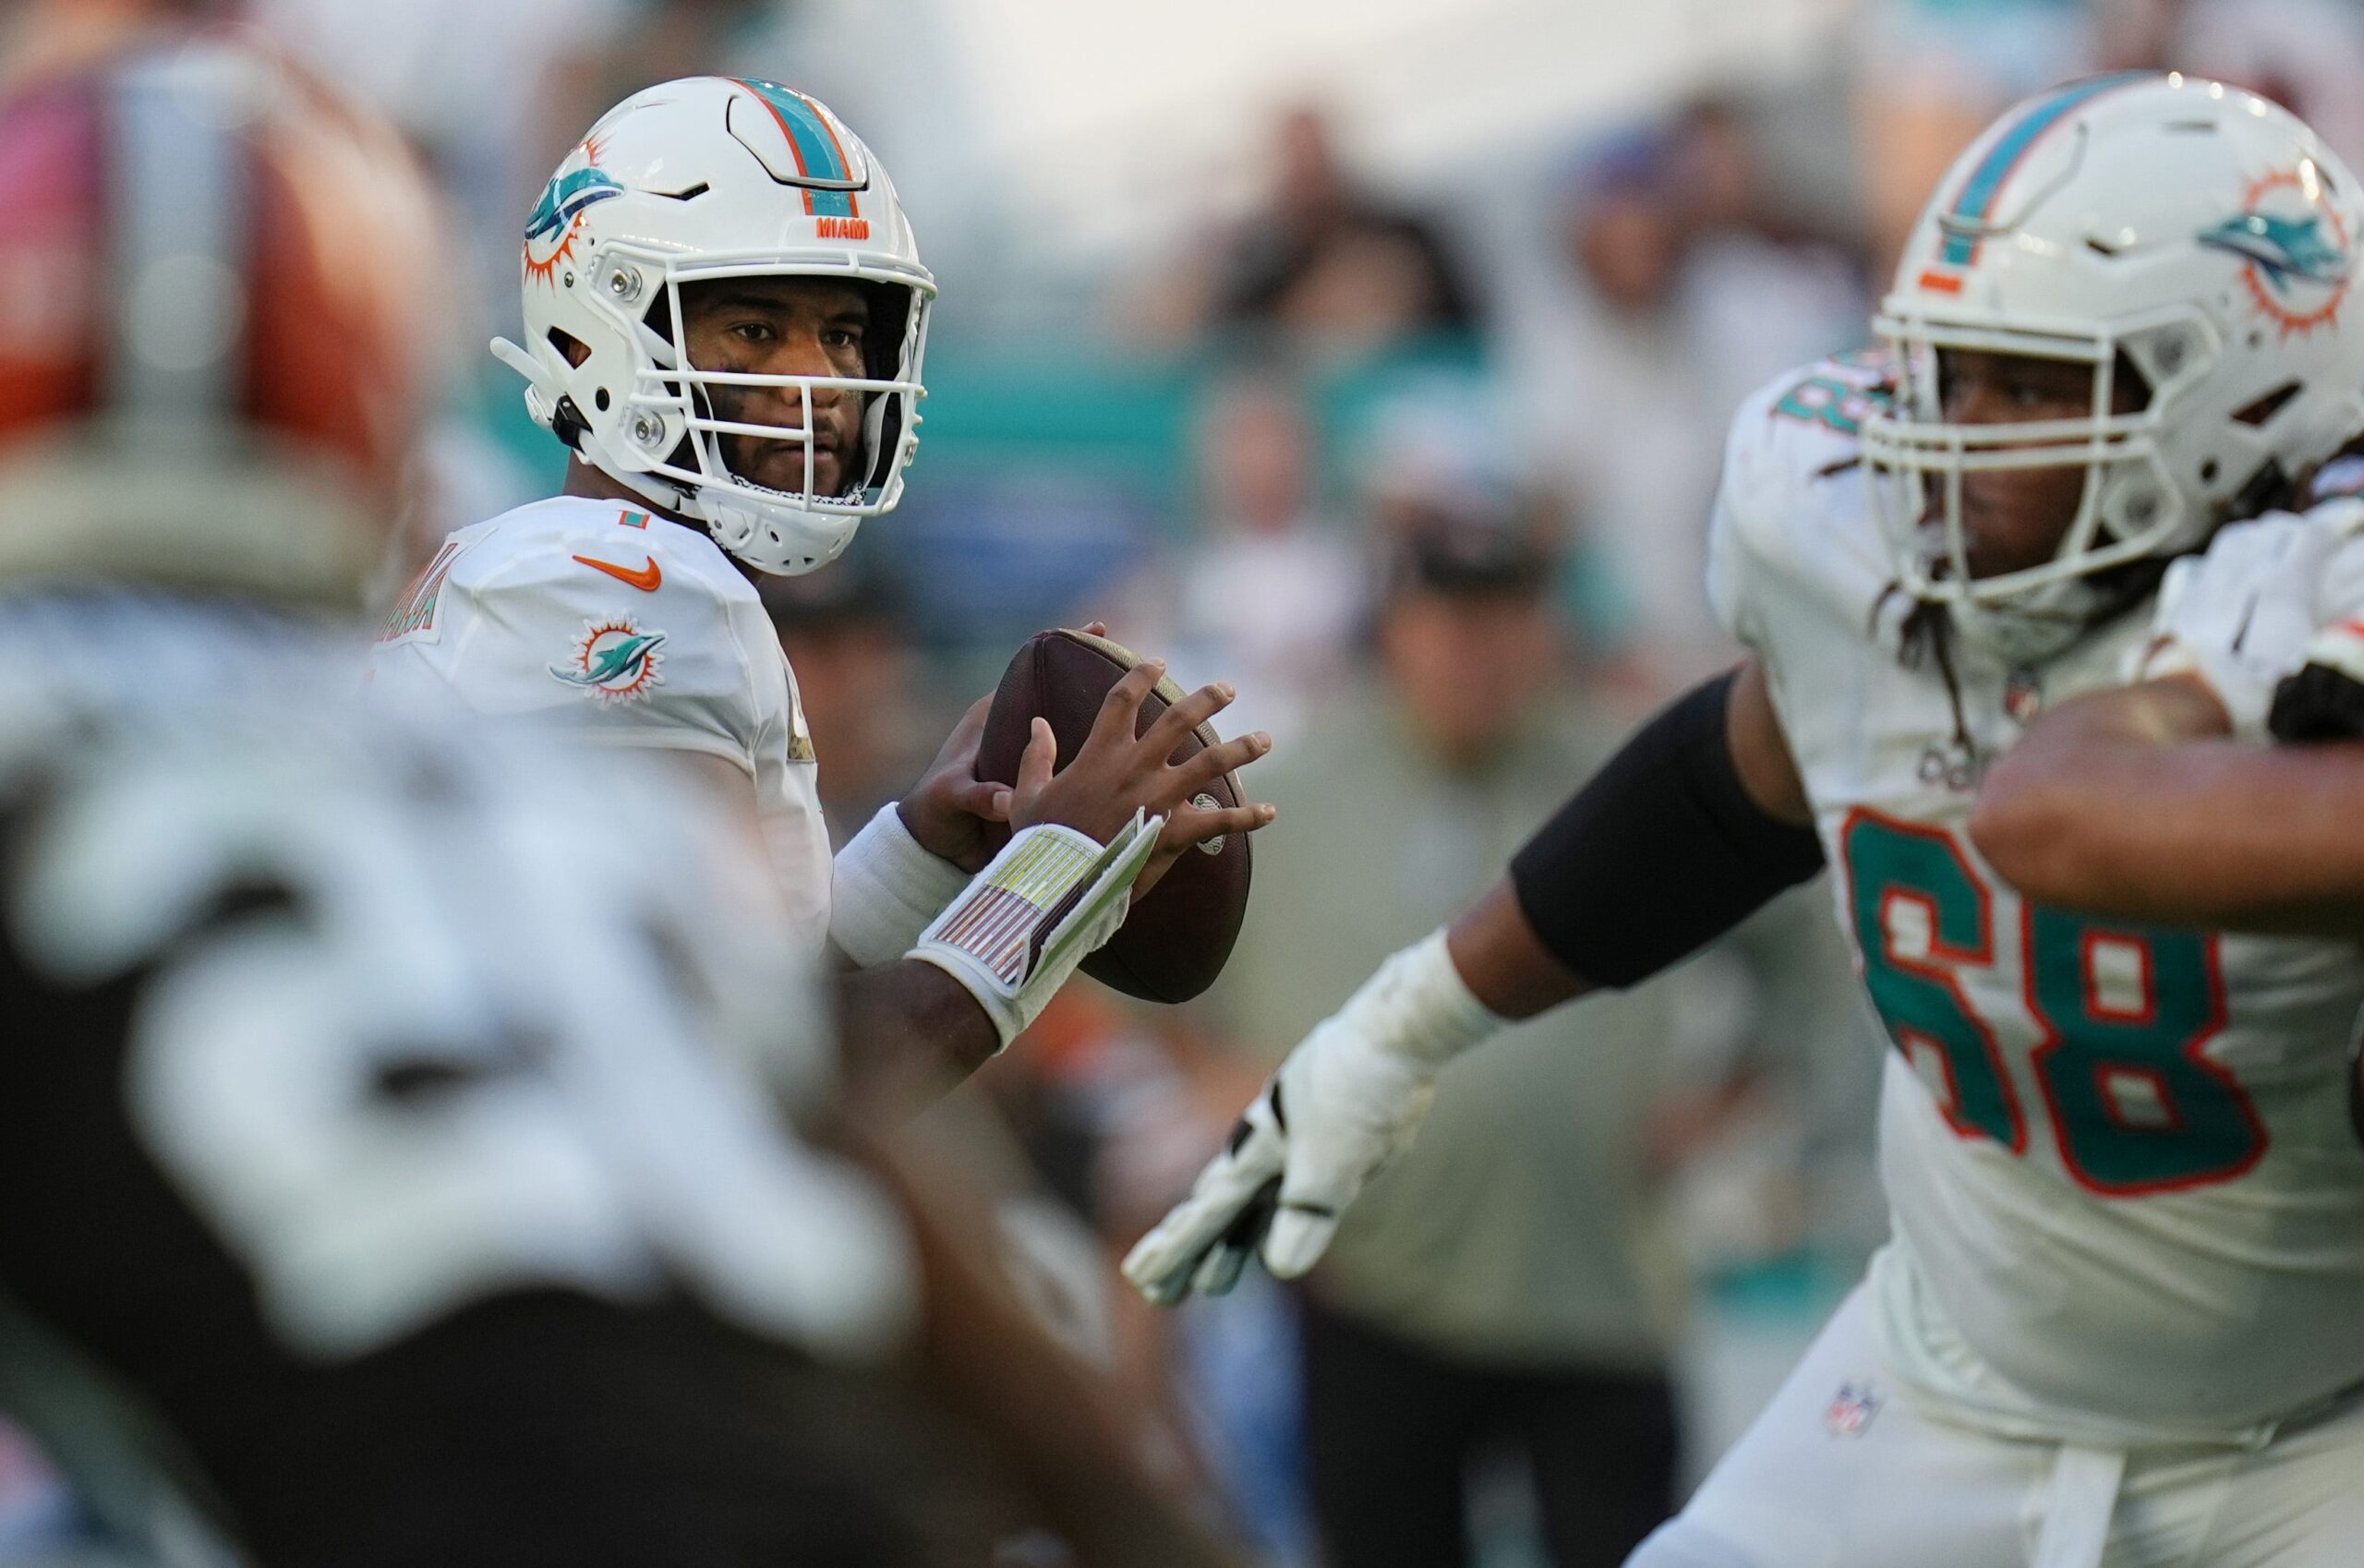 49ers acquire No. 3 overall pick from Dolphins; Miami gets No. 12